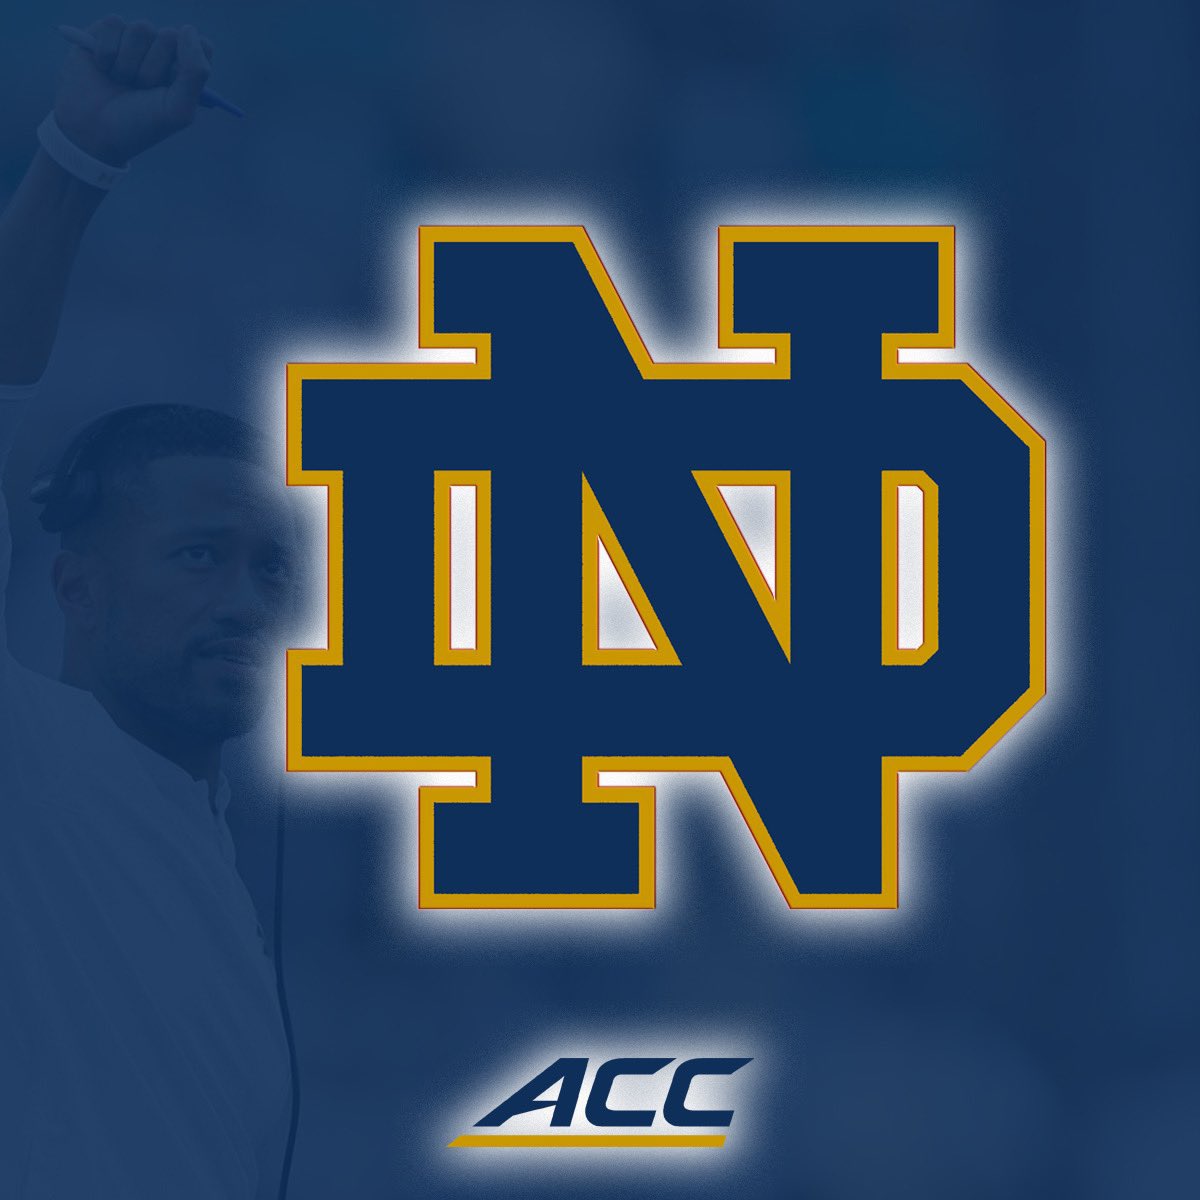 Thank you to @GinoGuidugli From @NDFootball for stopping by Folsom Today. We appreciate you! #GoBullDogs /#GoIrish @coach_angel3 @CoachTravisFHS @CoachIrsik1